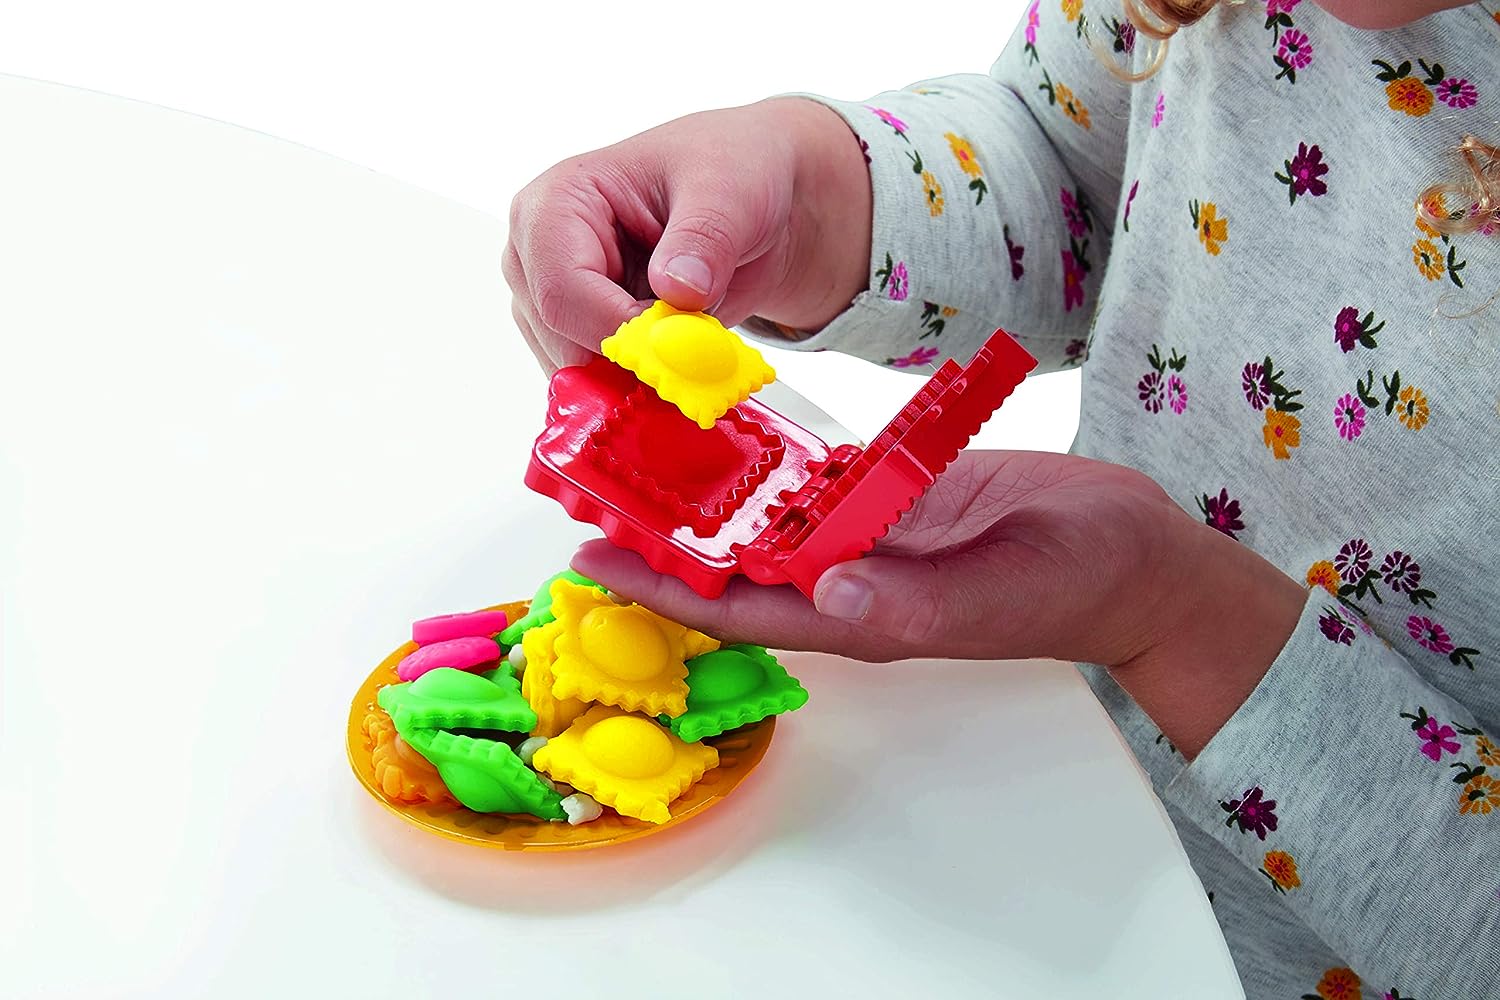 Play-Doh Kitchen Creations Noodle Party